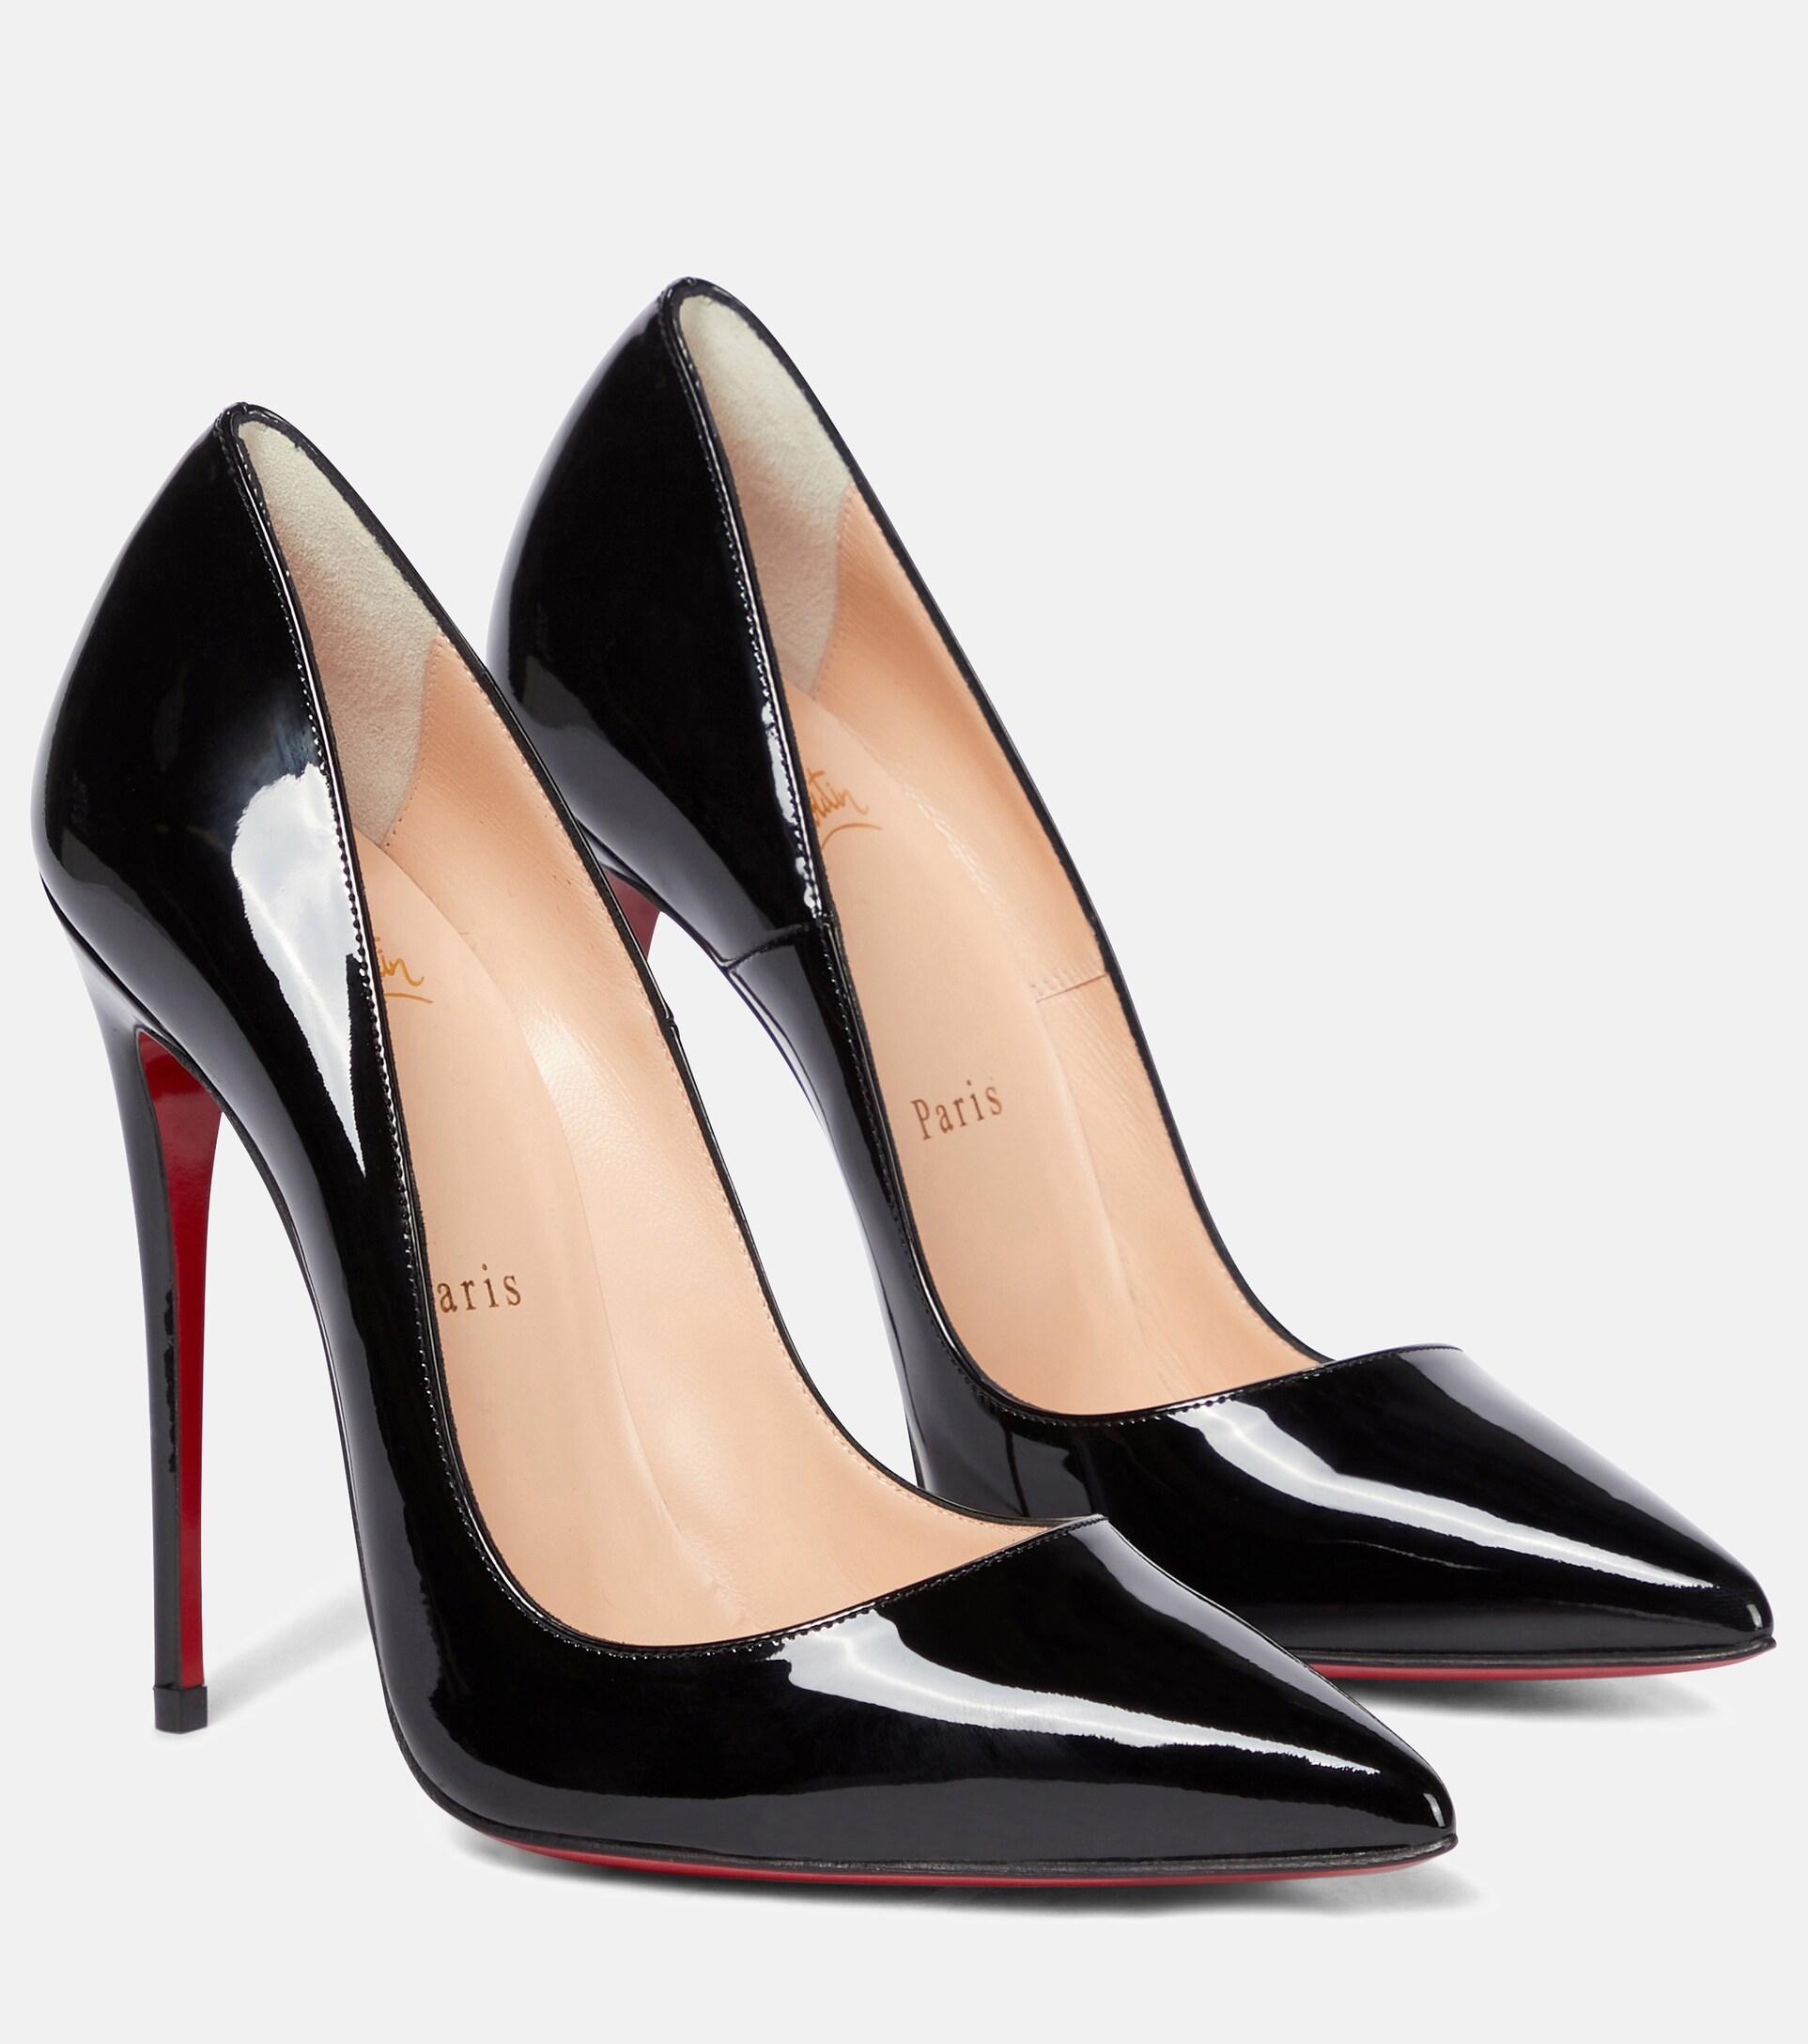 Christian Louboutin So Kate 120 Patent Leather Pumps in Black | Lyst